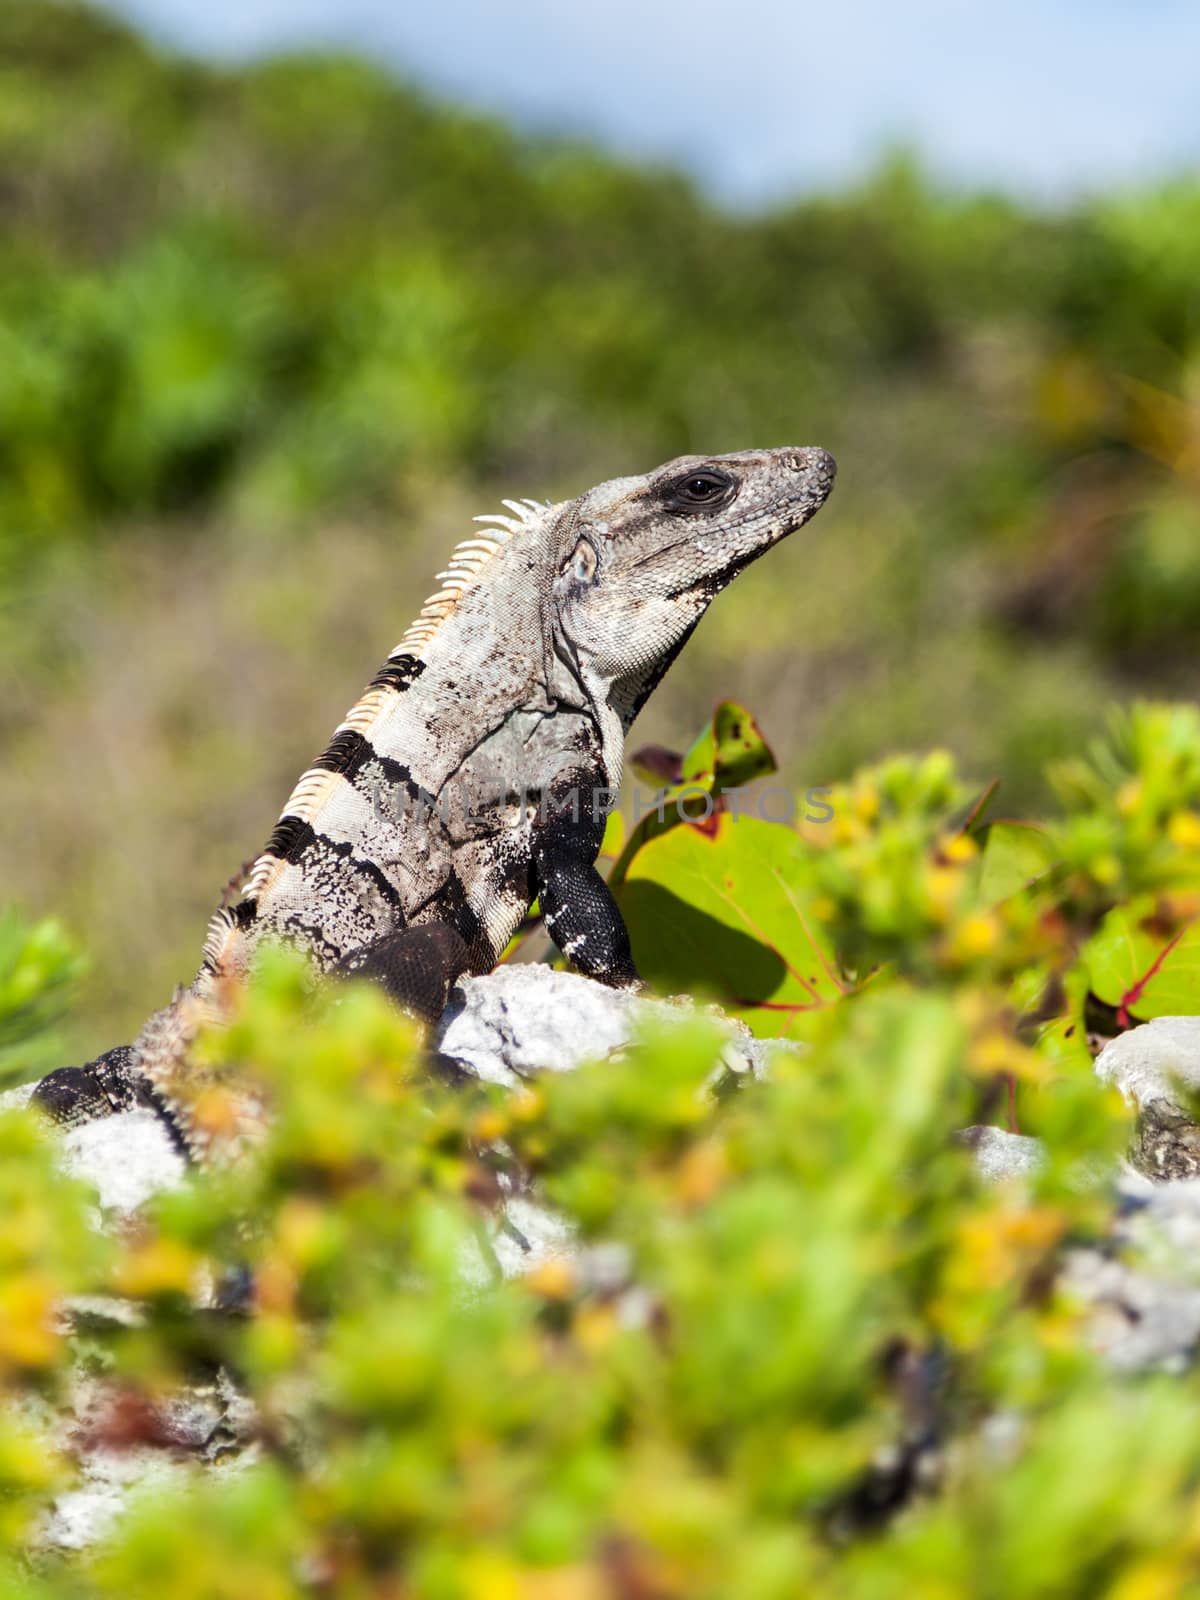 Portrait of a large gray-brown iguana in its natural habitat